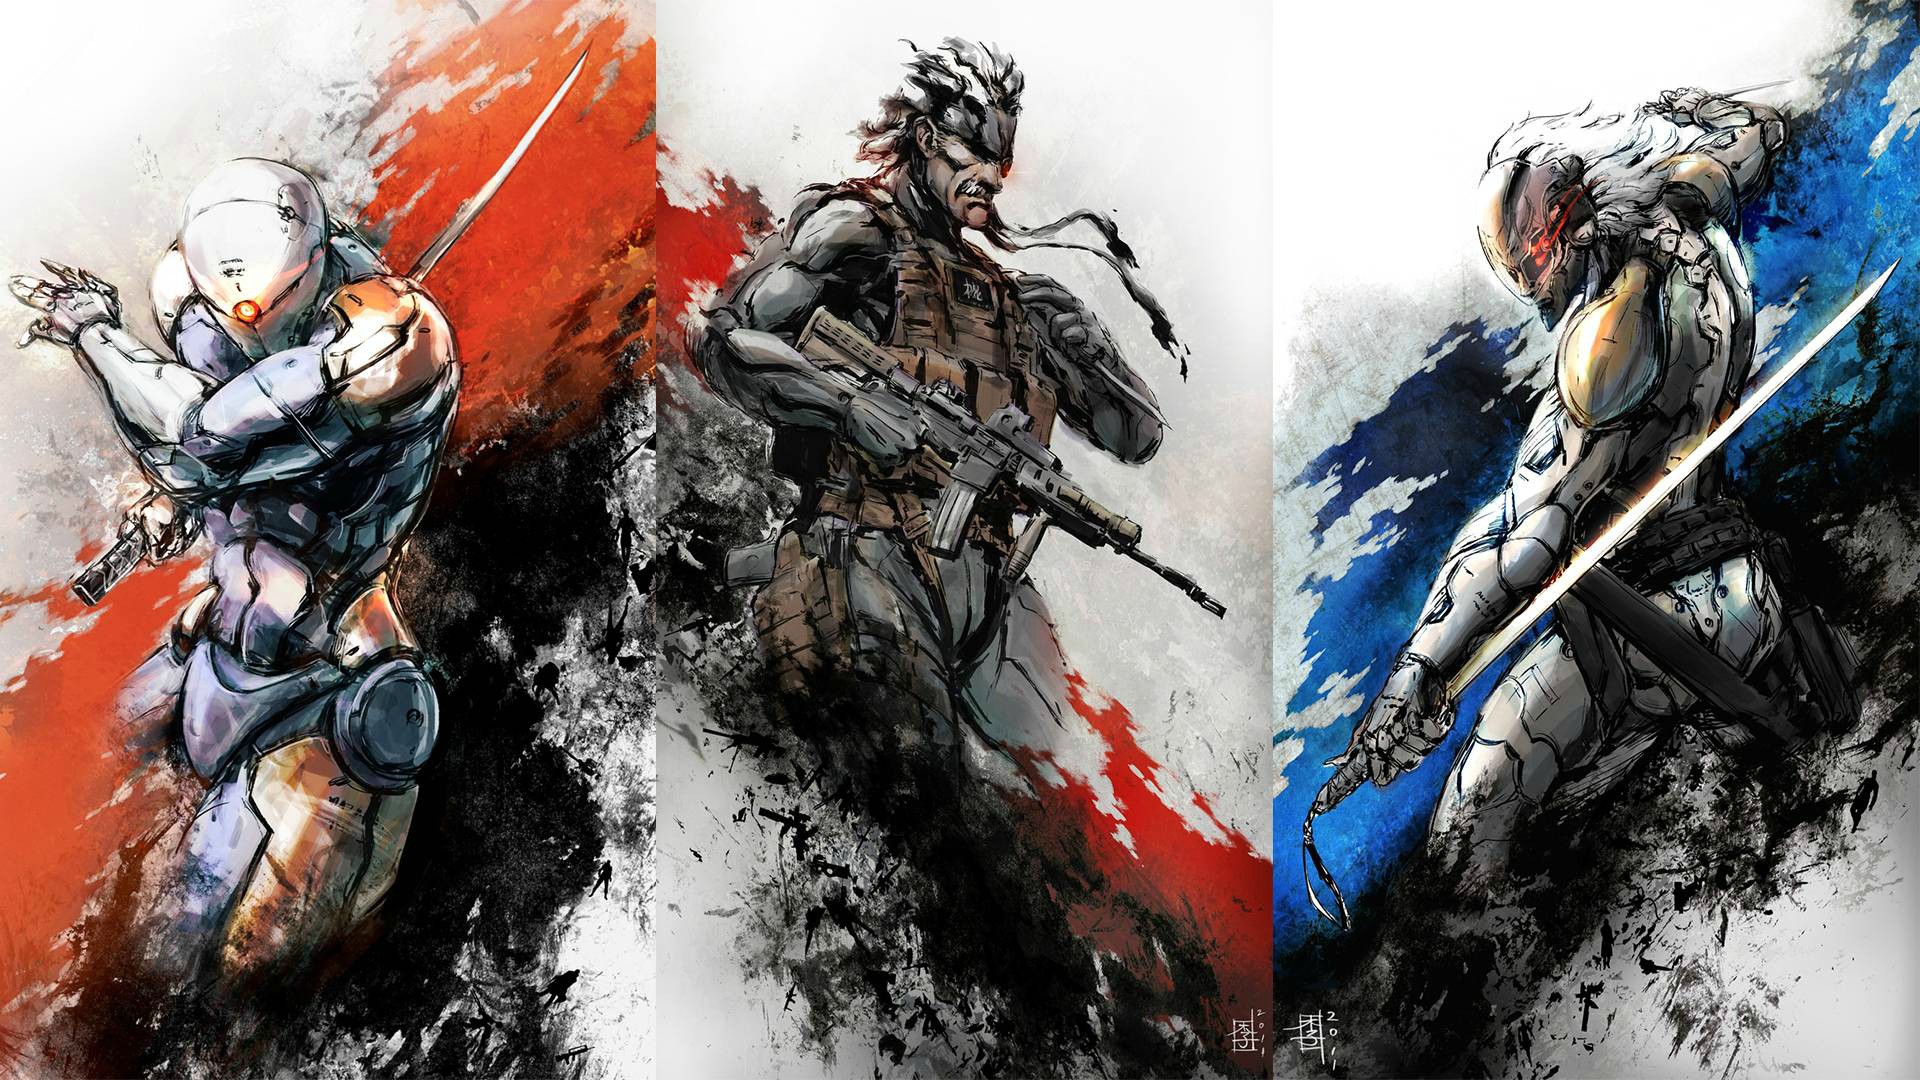 Video Game Characters Metal Gear Solid Solid Snake Metal Gear Solid 4 1920x1080